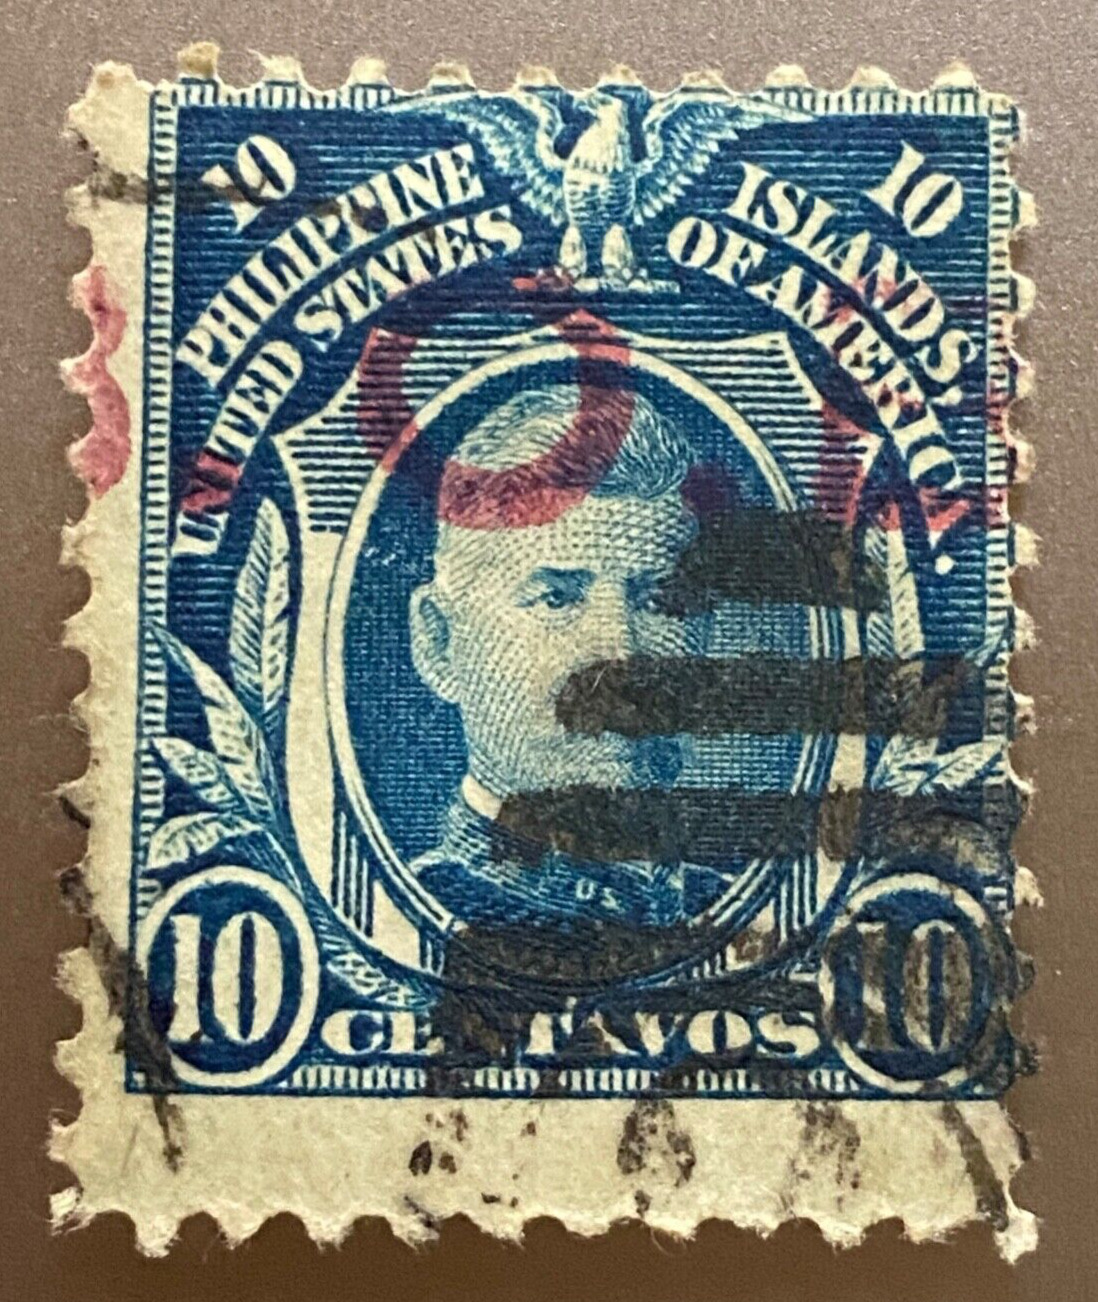 1931 10c Philippine Islands Official Stamp, deep blue, unwatermarked, perf 11